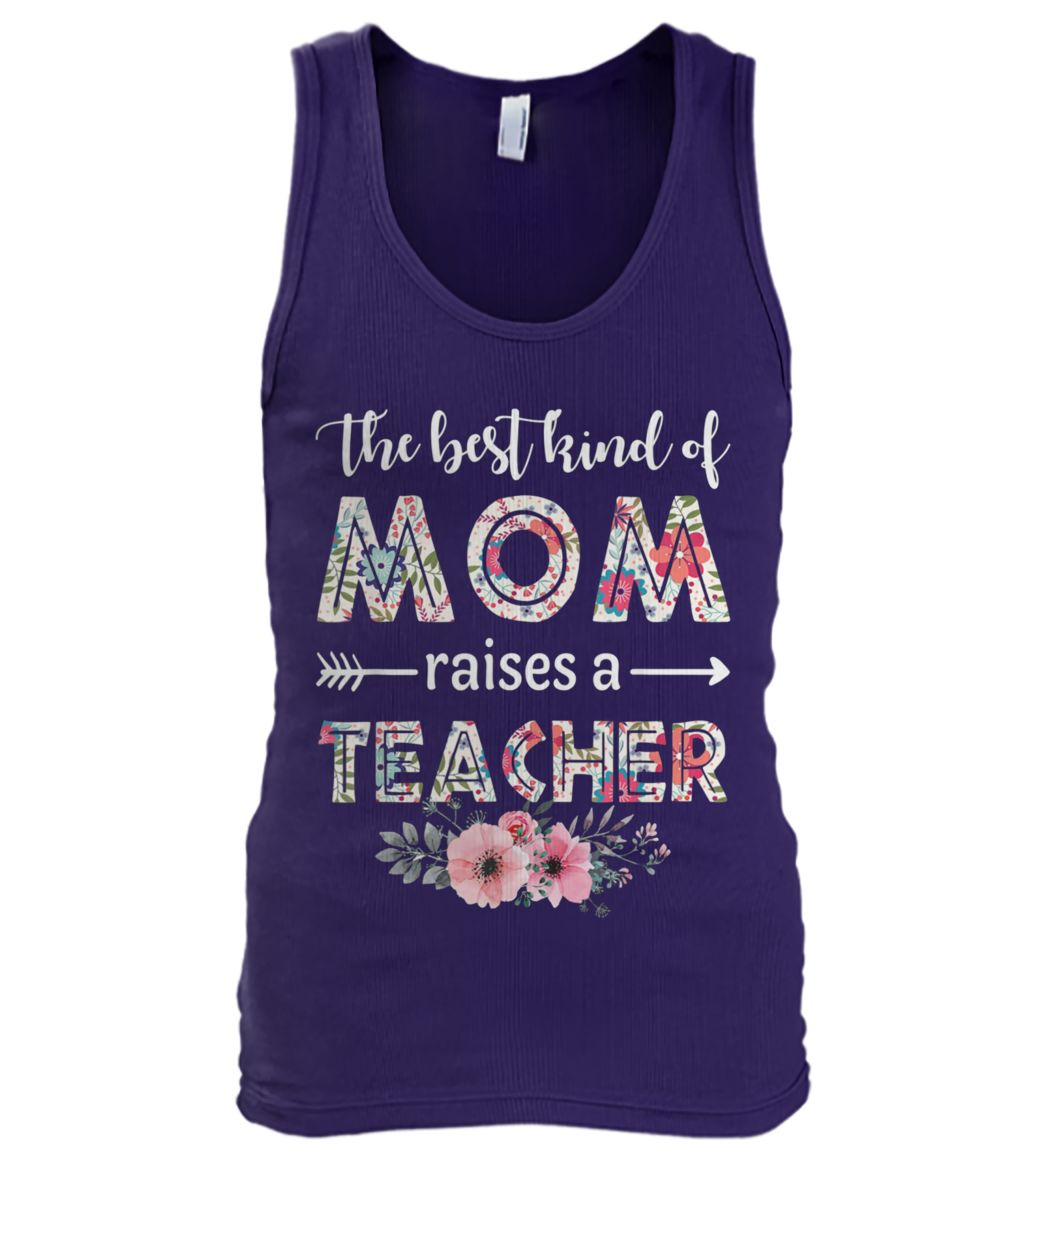 The best kind of mom raises a teacher happy mother day men's tank top